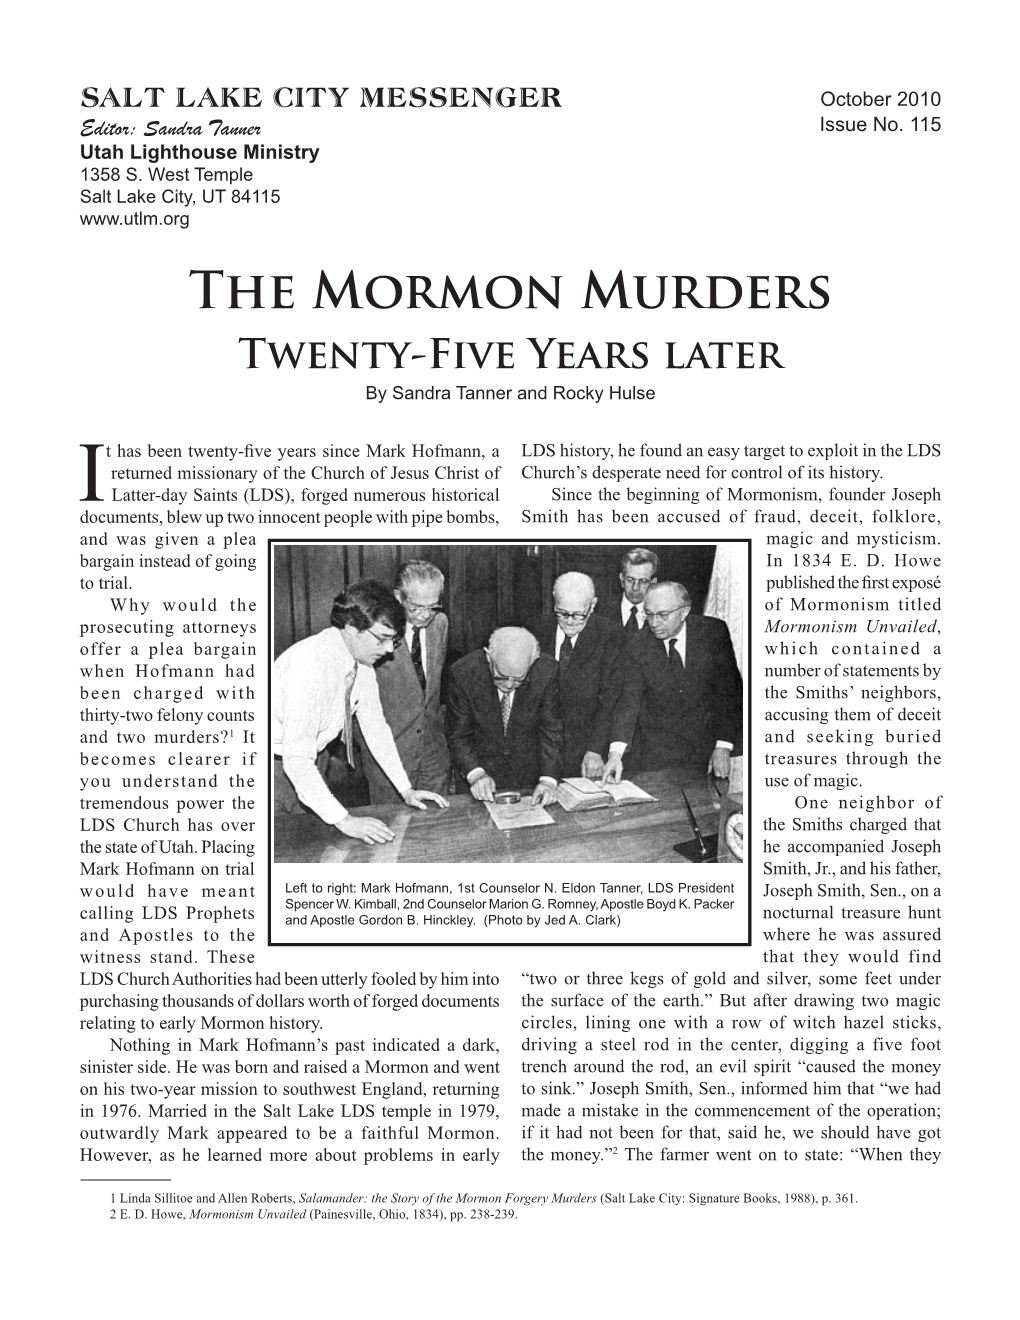 The Mormon Murders Twenty-Five Years Later by Sandra Tanner and Rocky Hulse